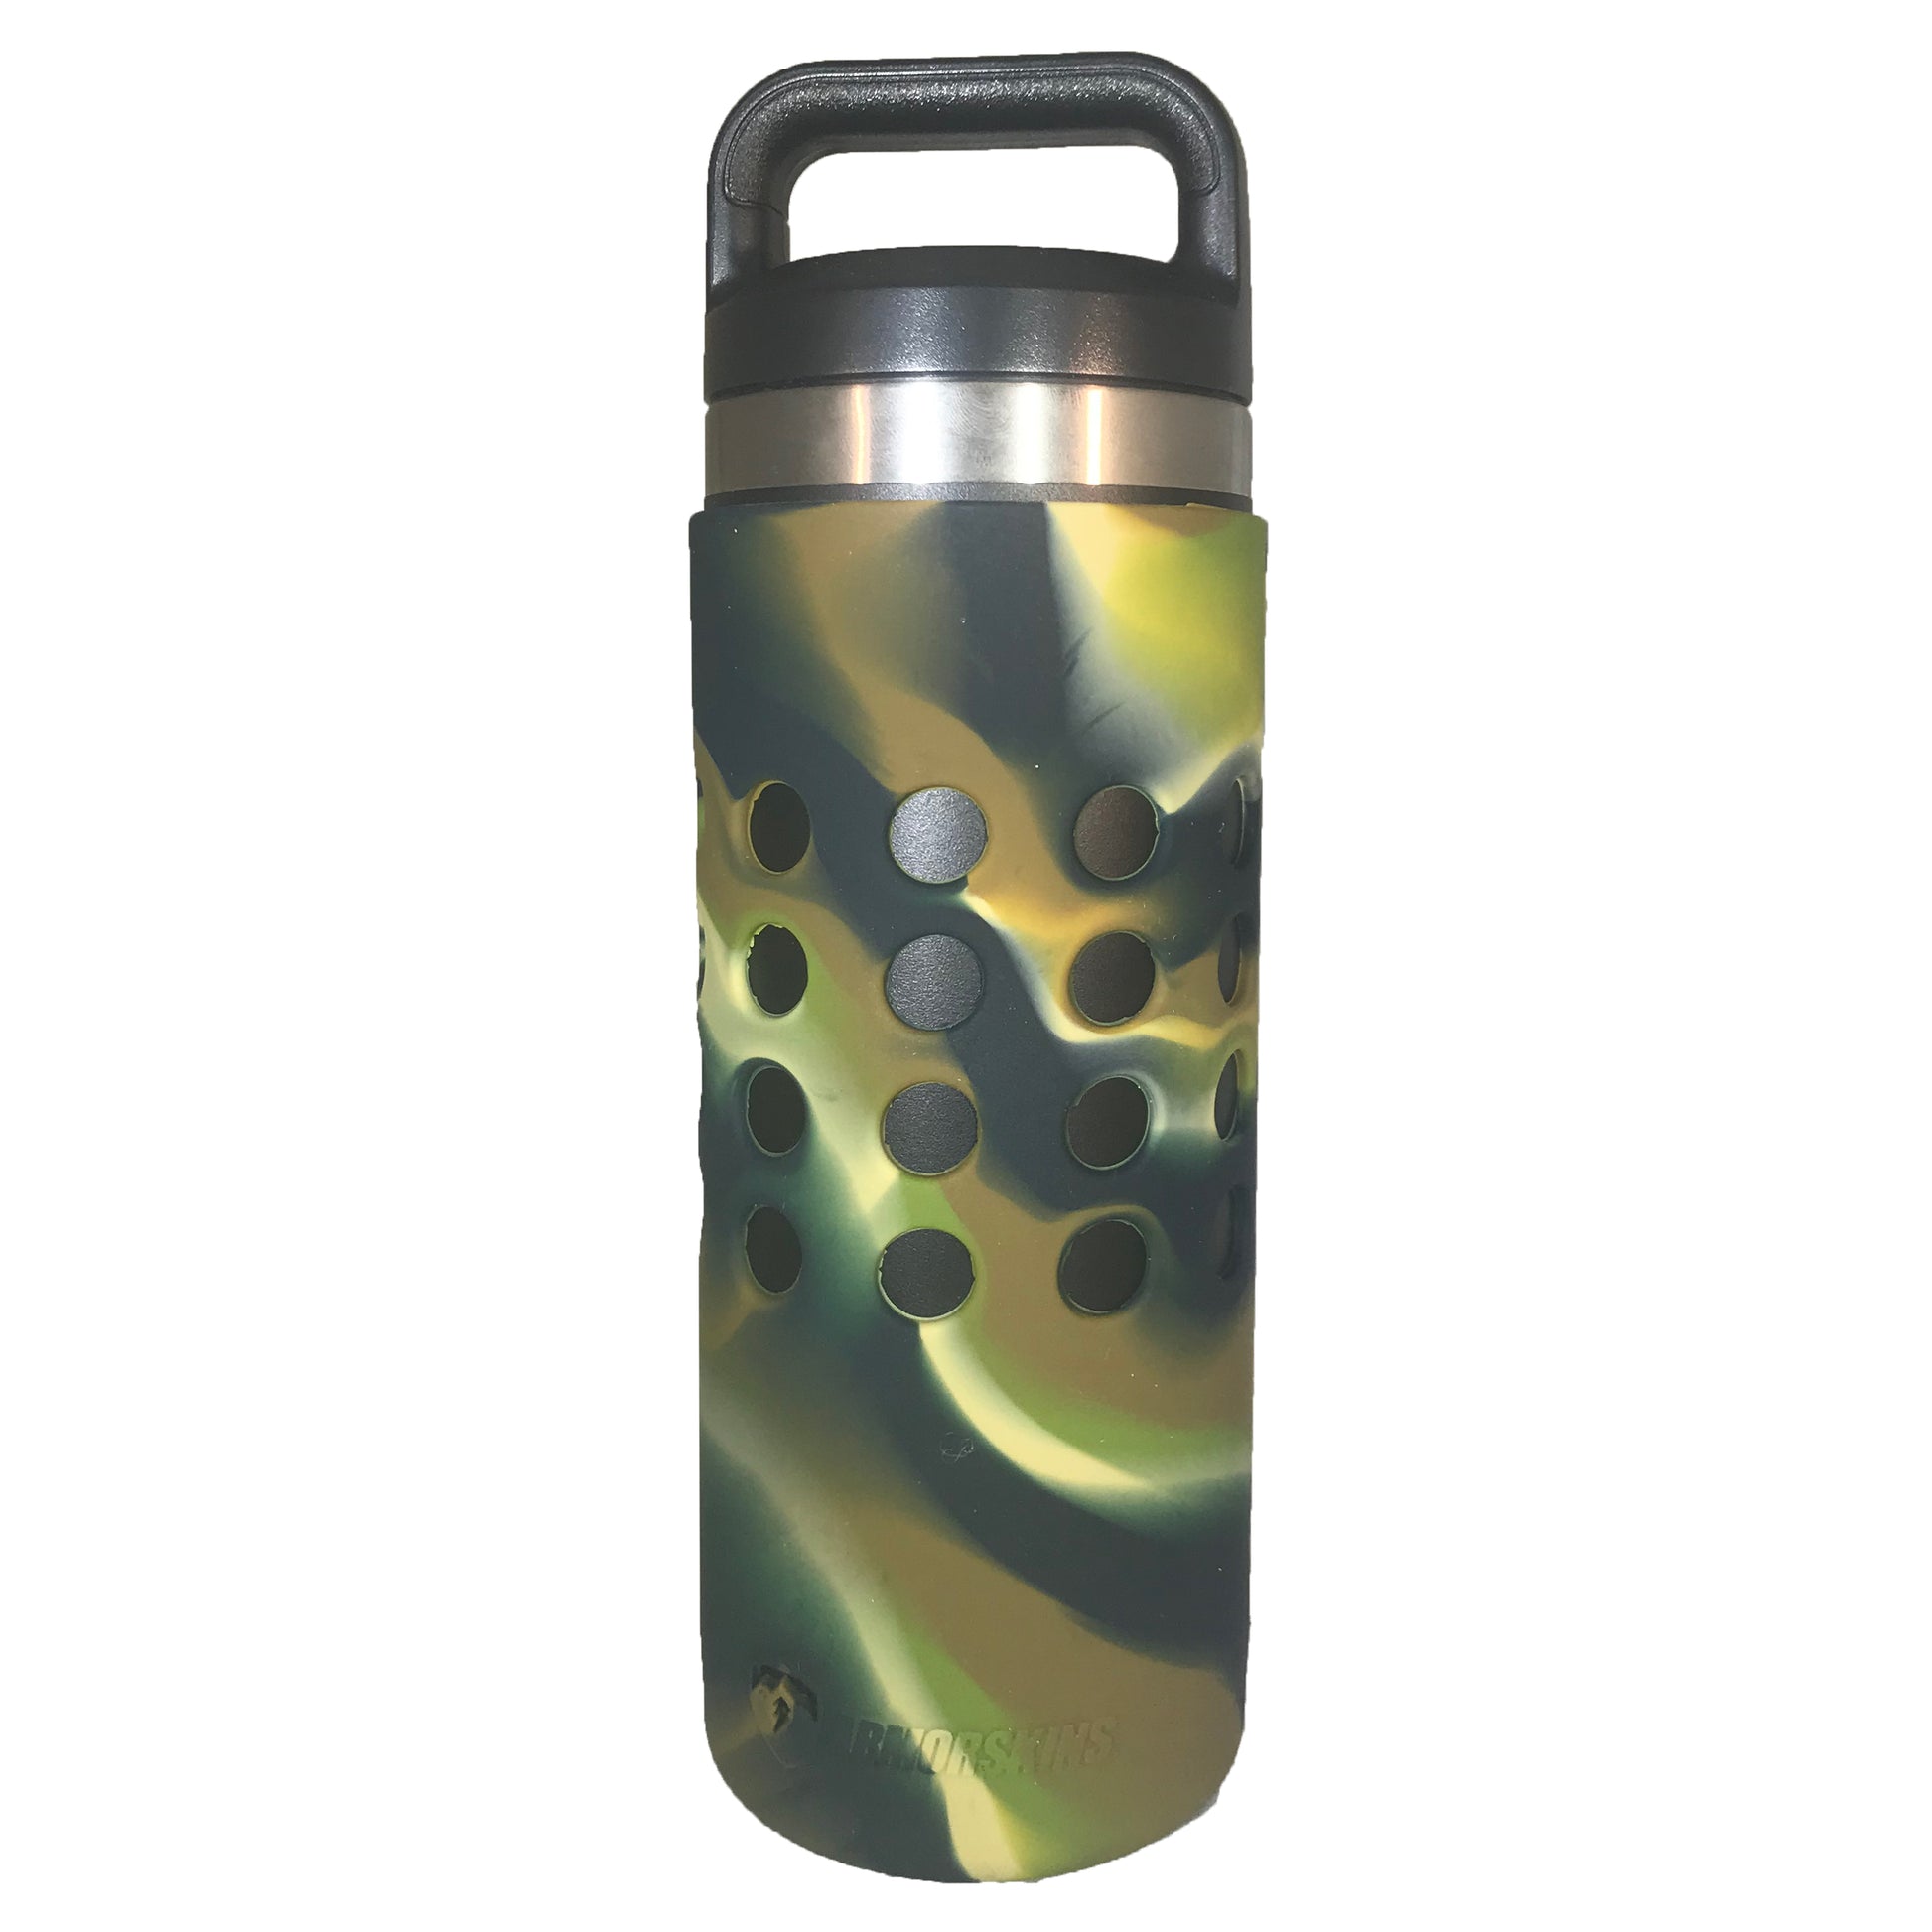 Skin for Yeti Rambler 64 oz Bottle - Solid State Olive Drab by Solid Colors